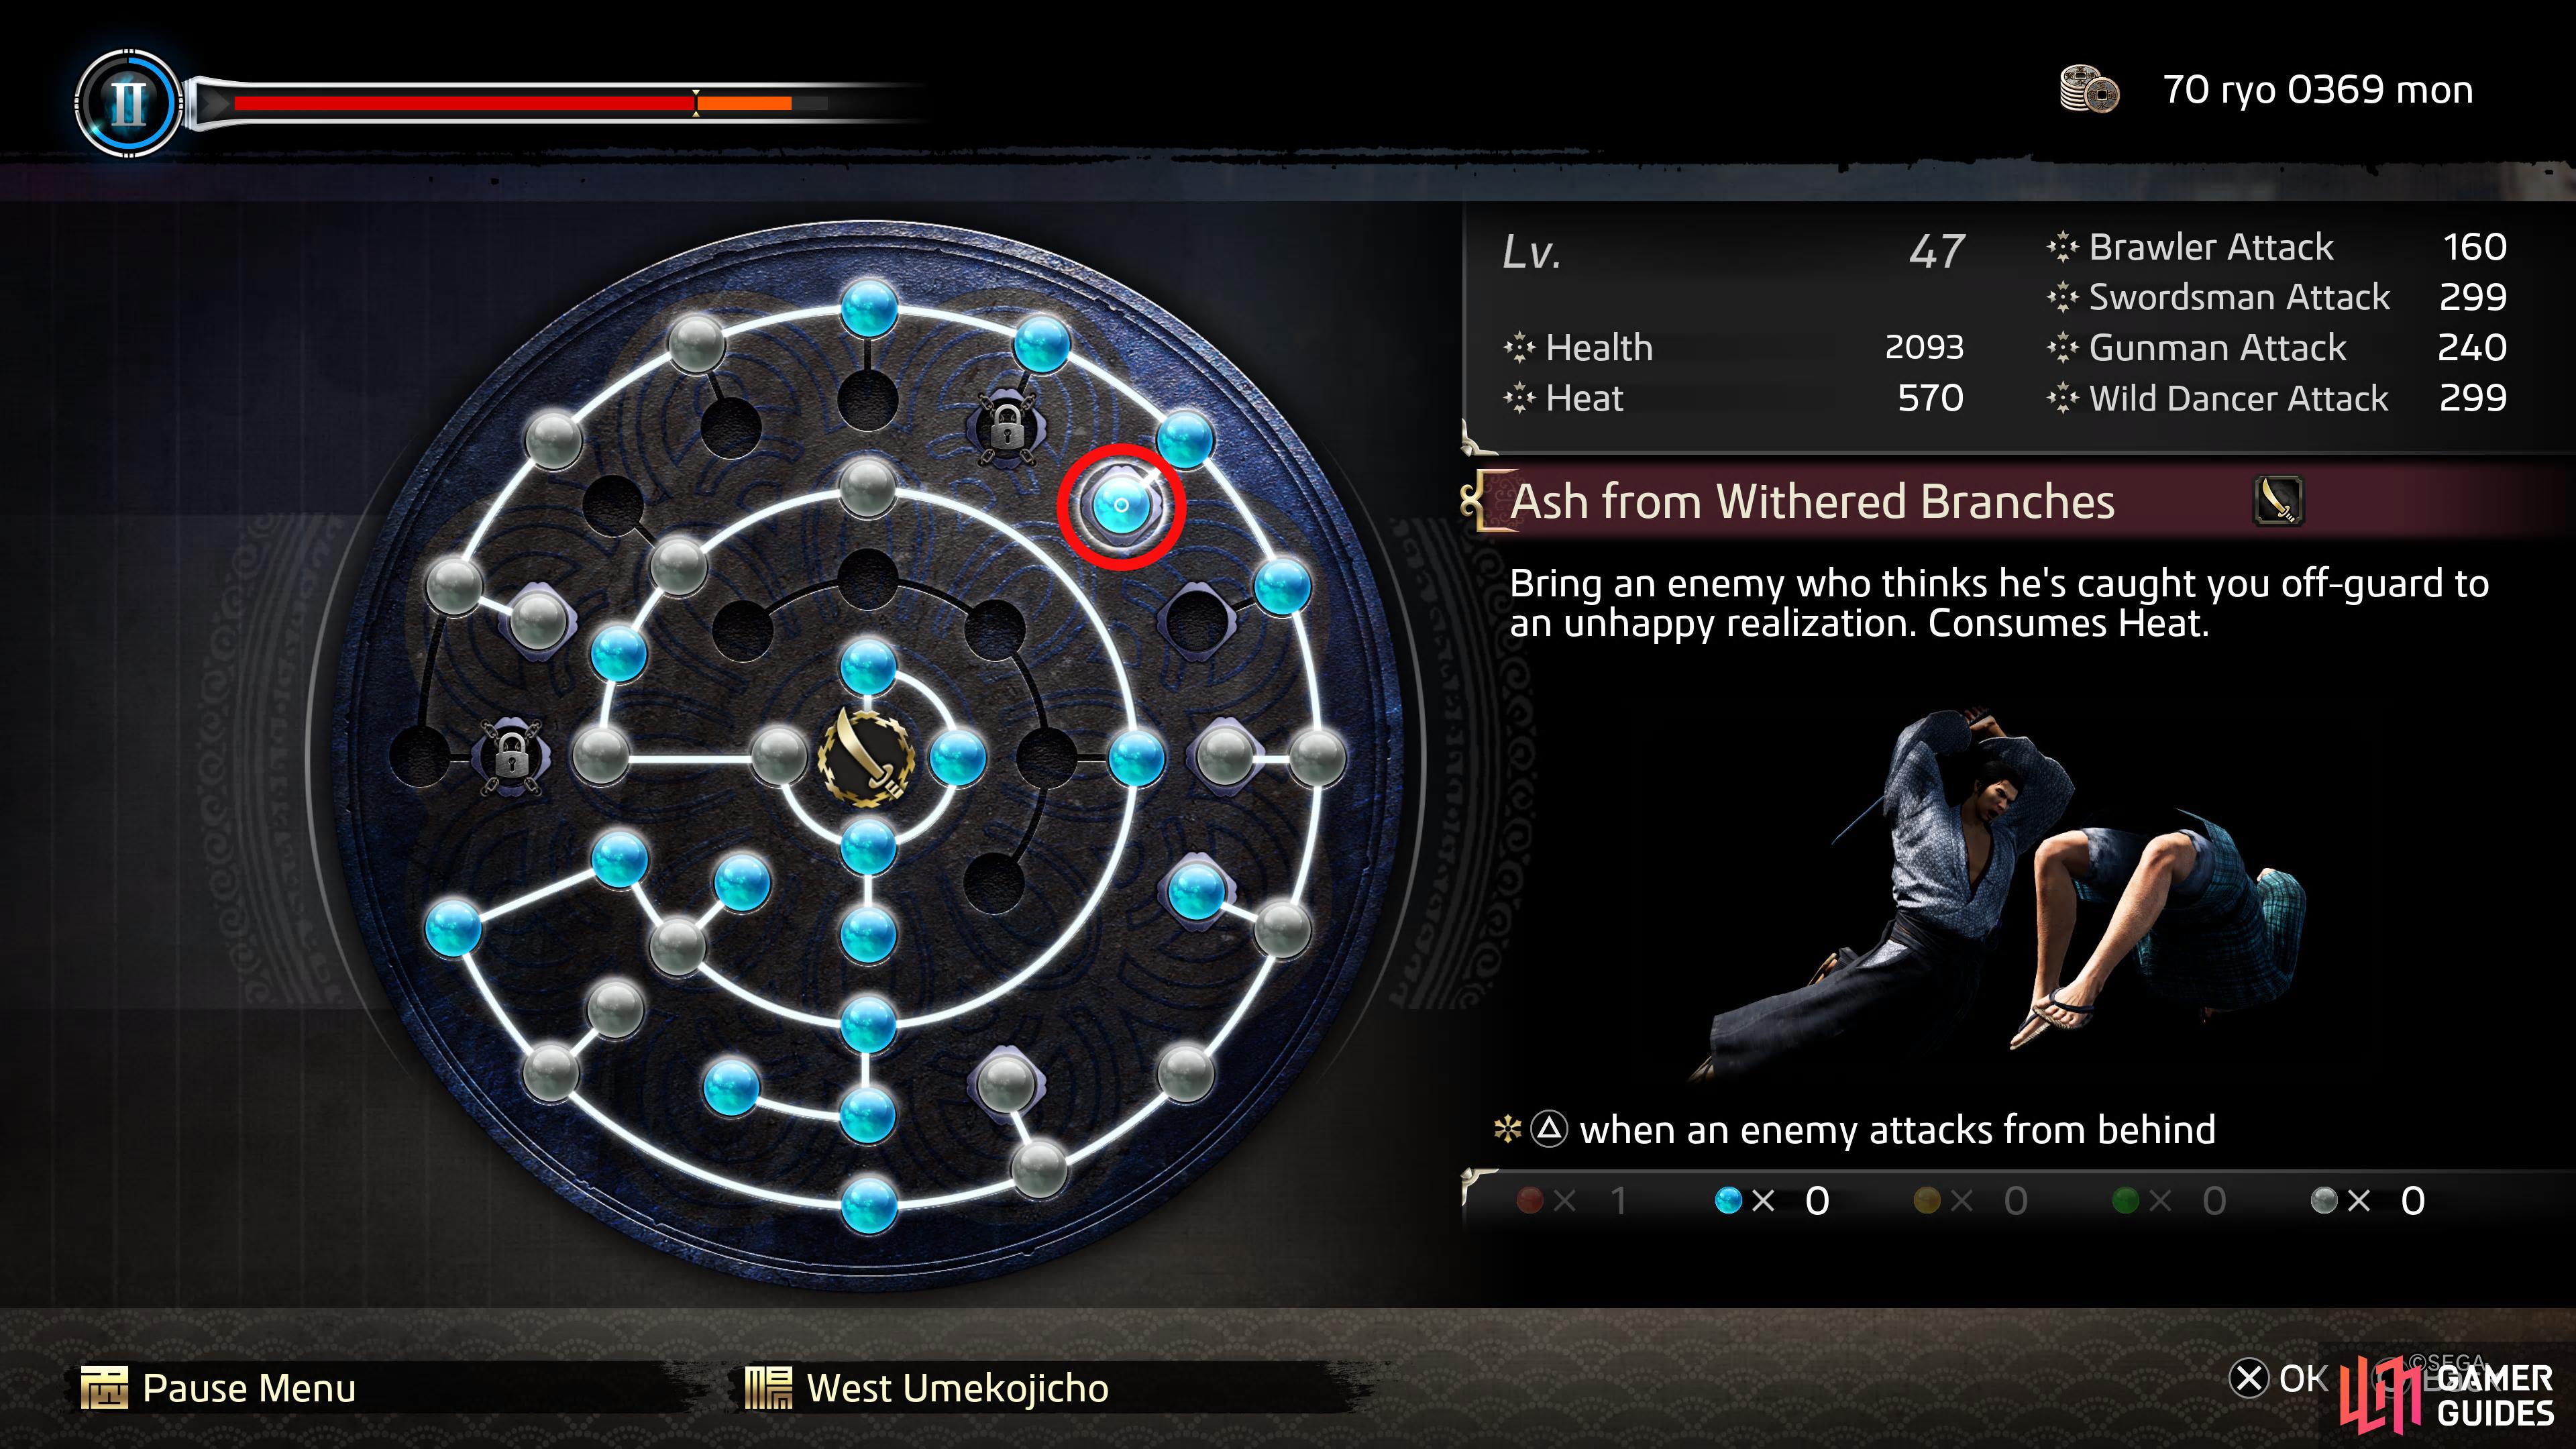 Here is where Ash From Withered Branches appears on the Ability Wheel.